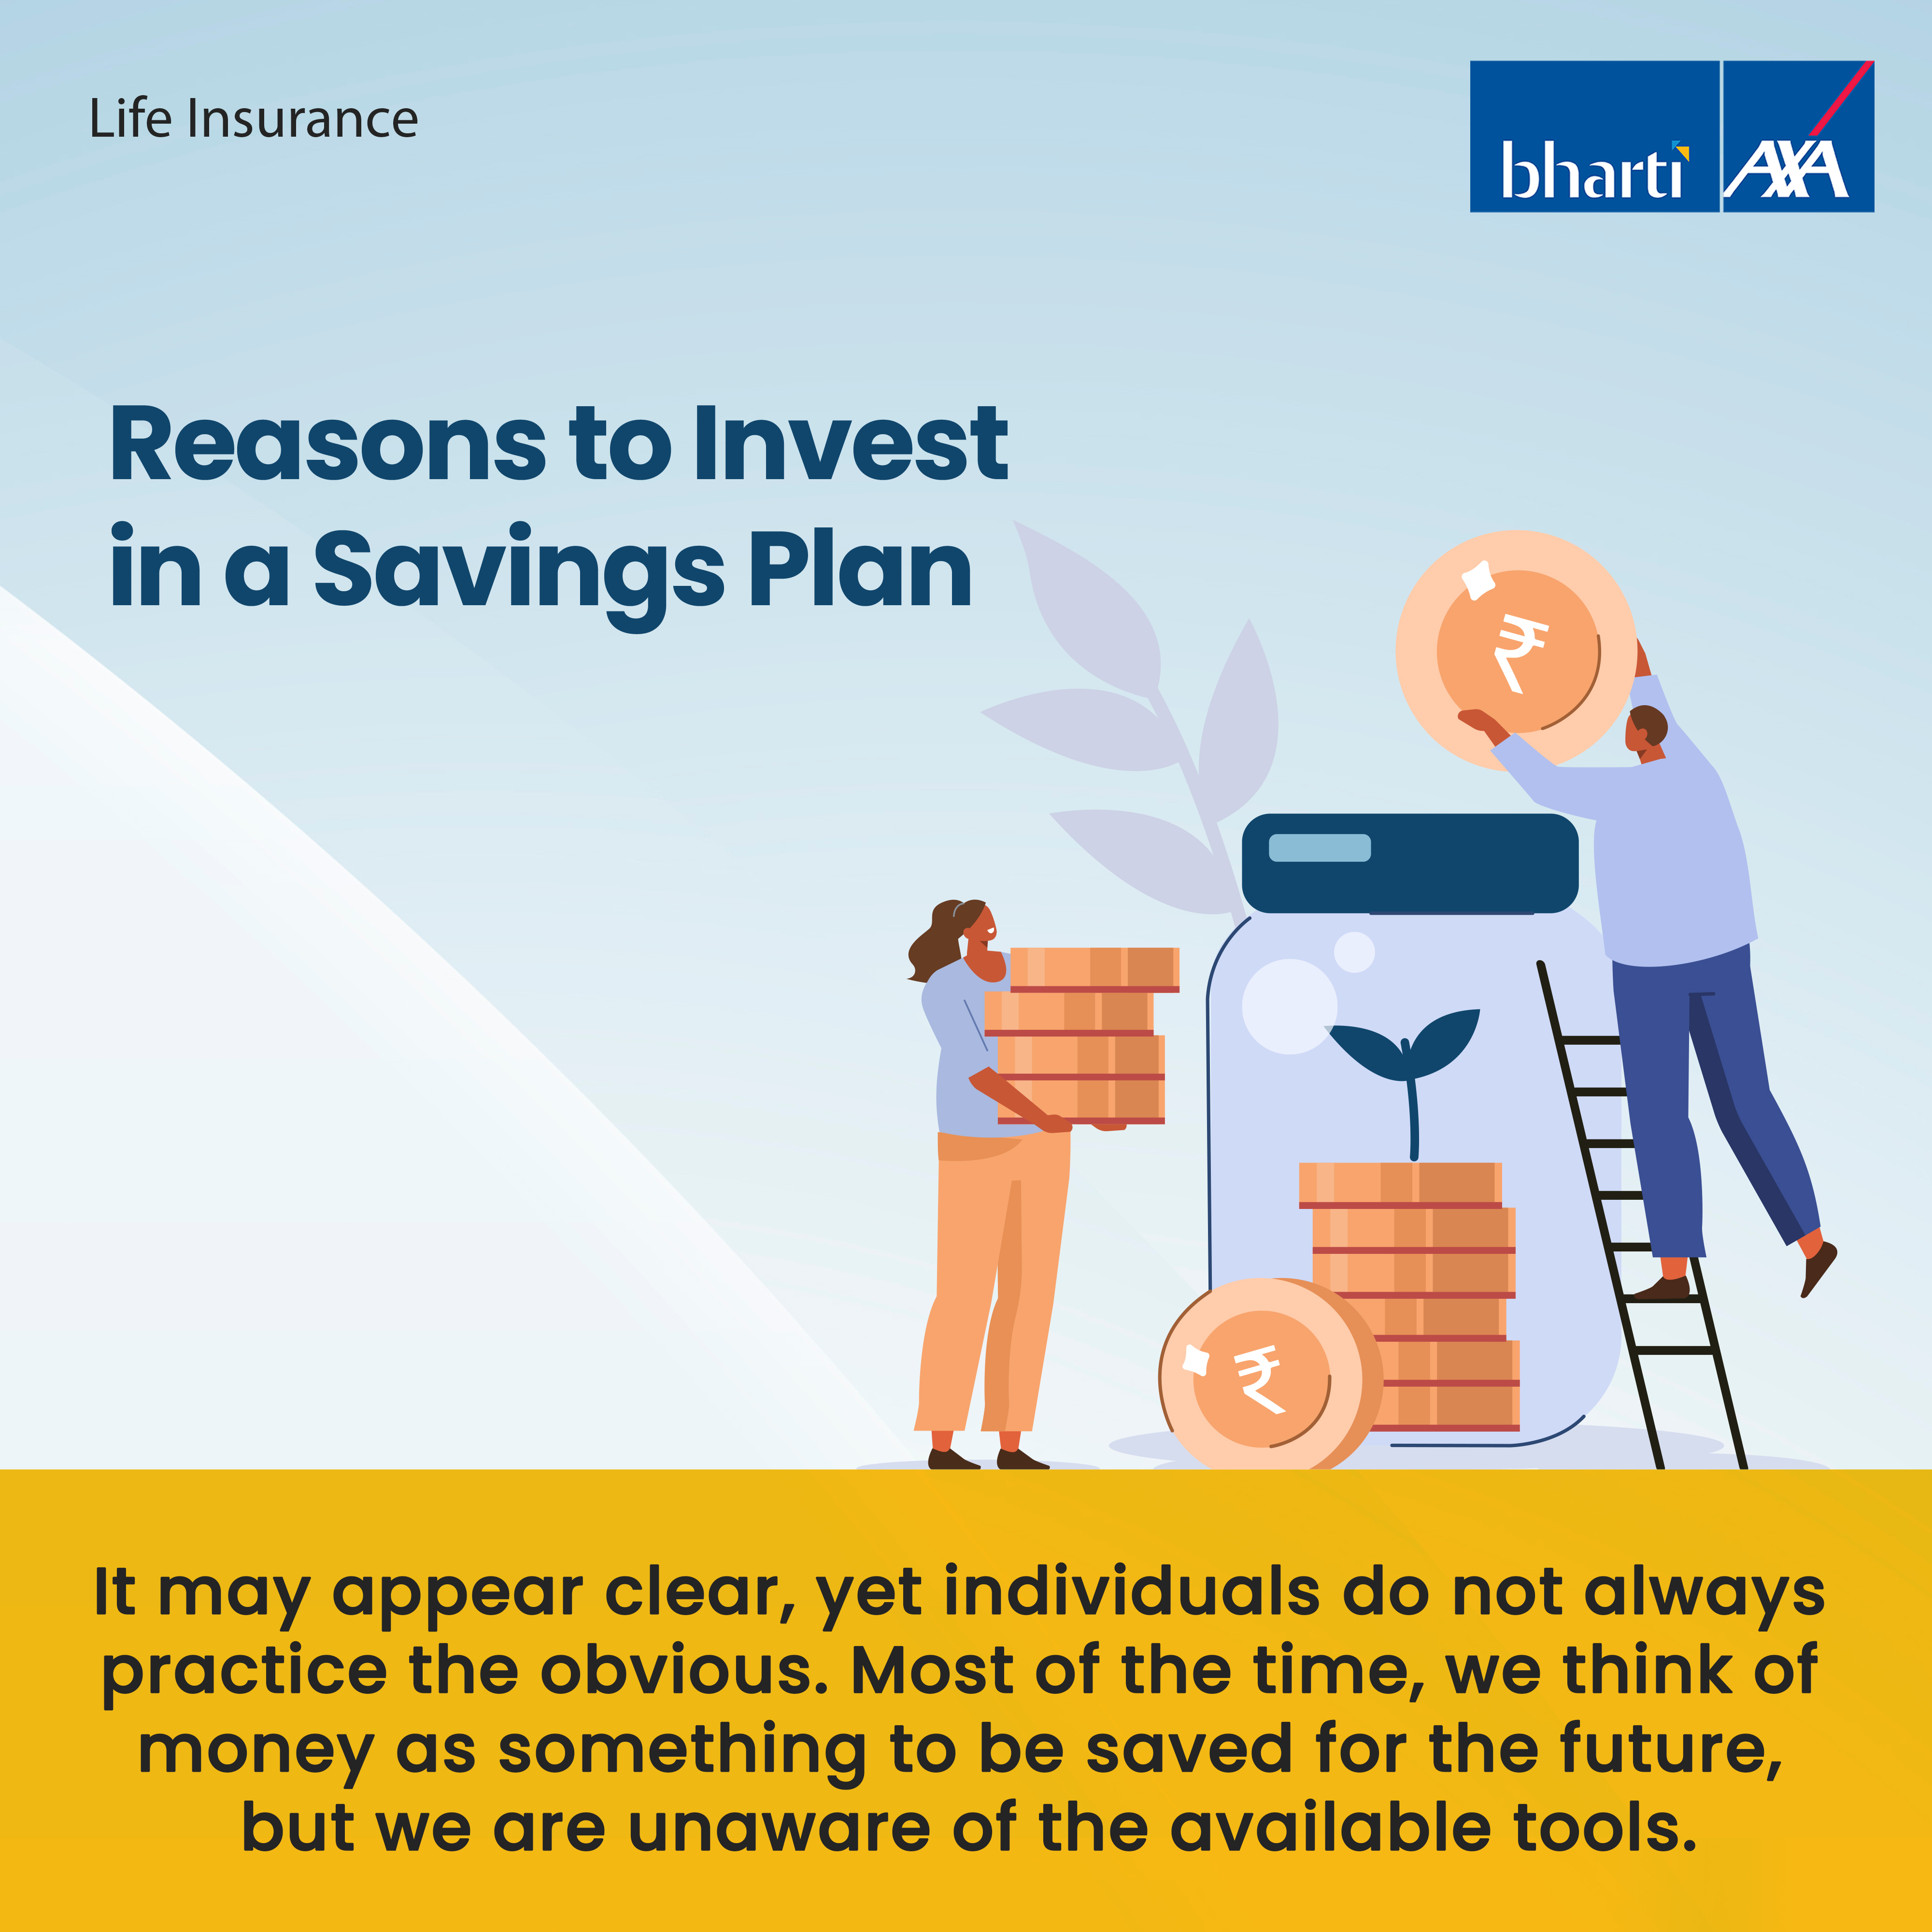 You should know the reason why you are investing in the Savings Plan